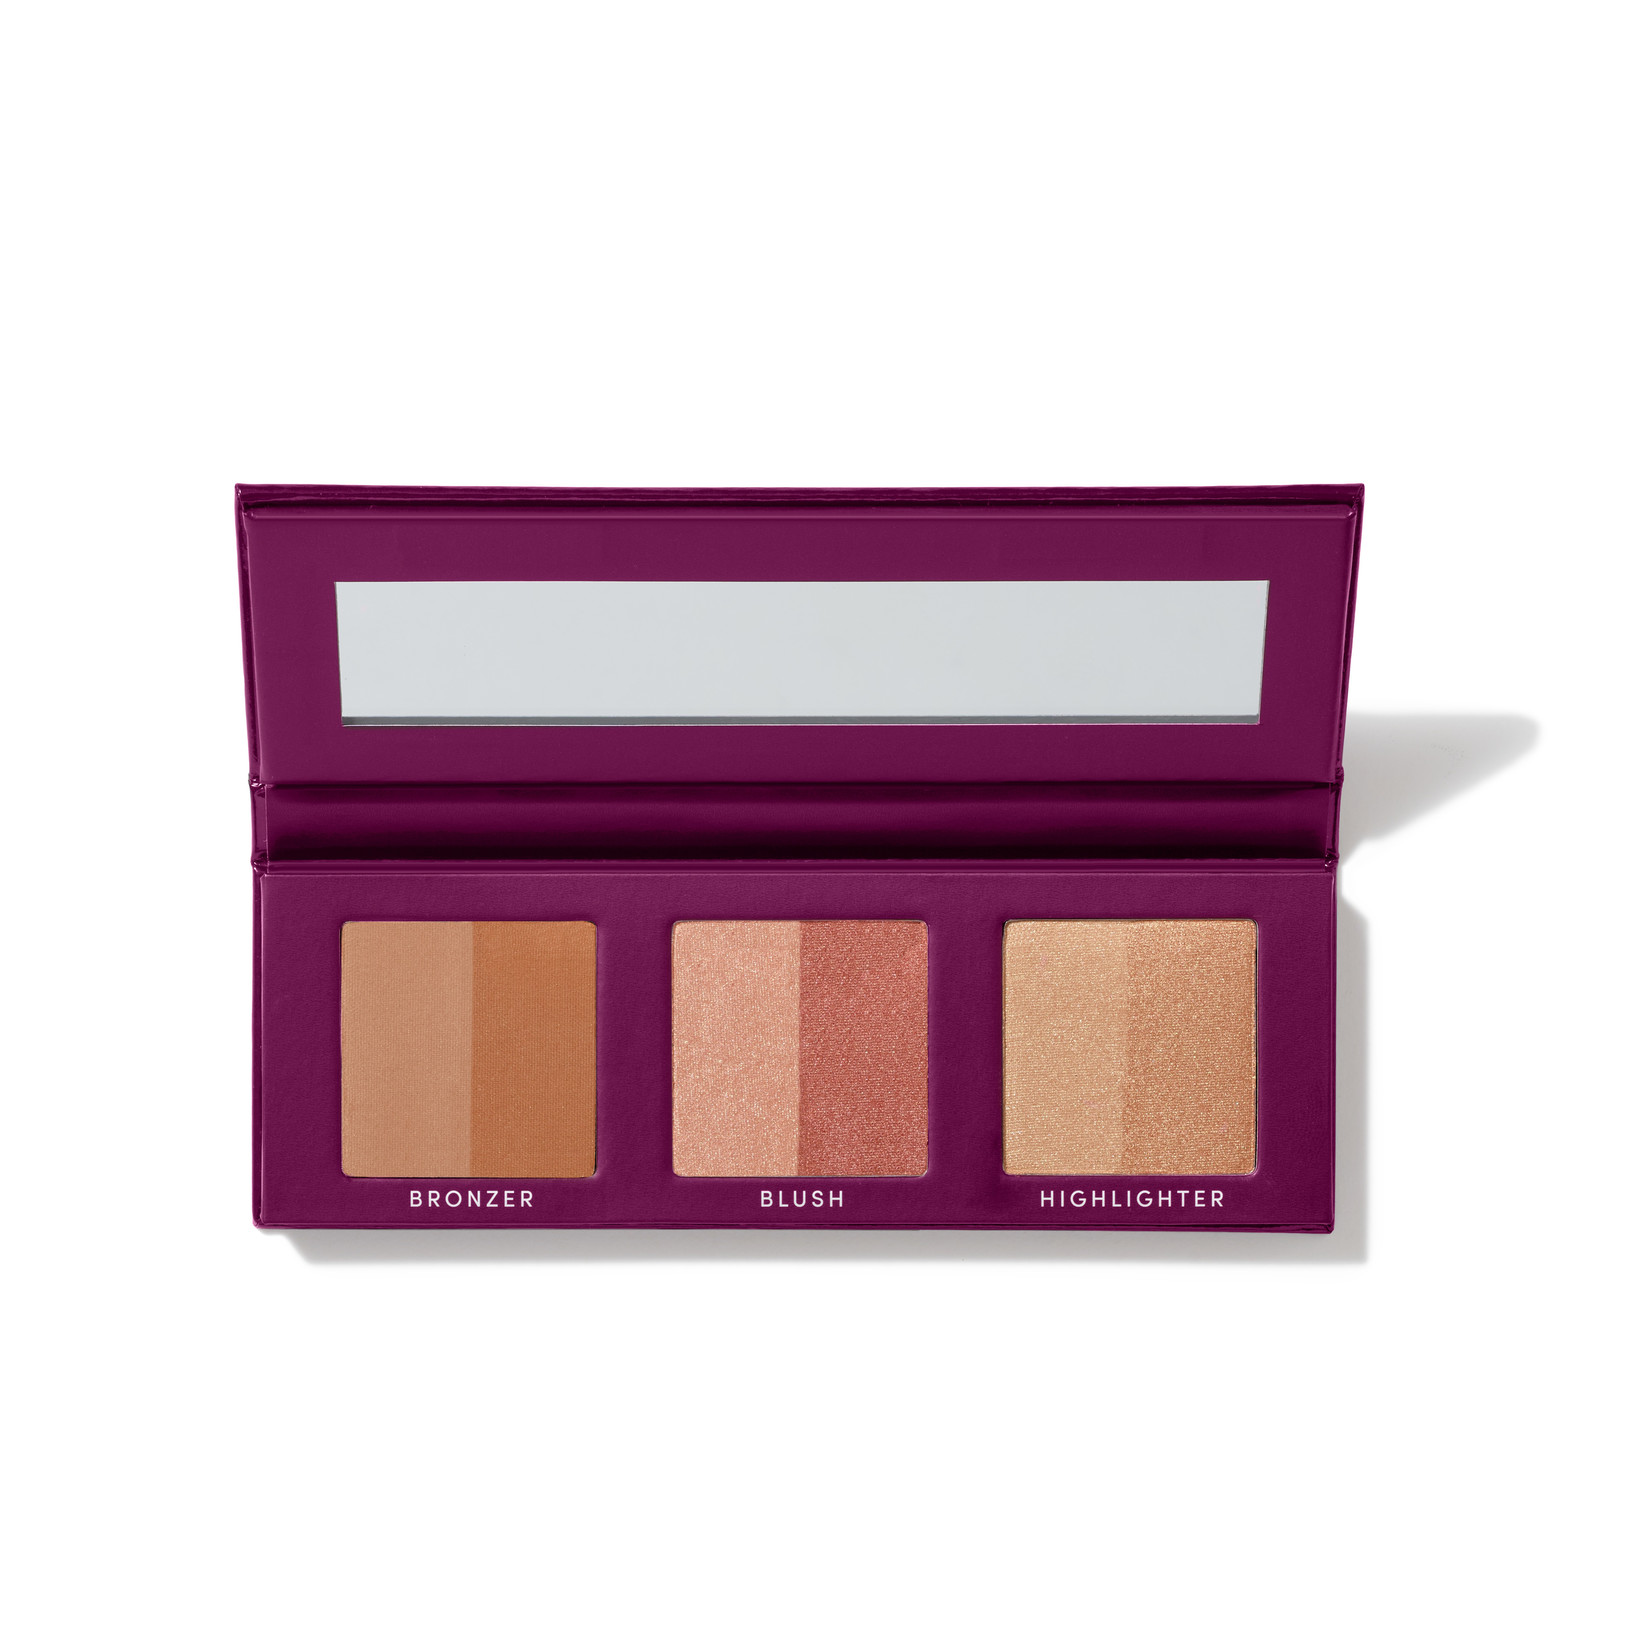 jane iredale limited edition - face palette (blush, bronzer& highlight)